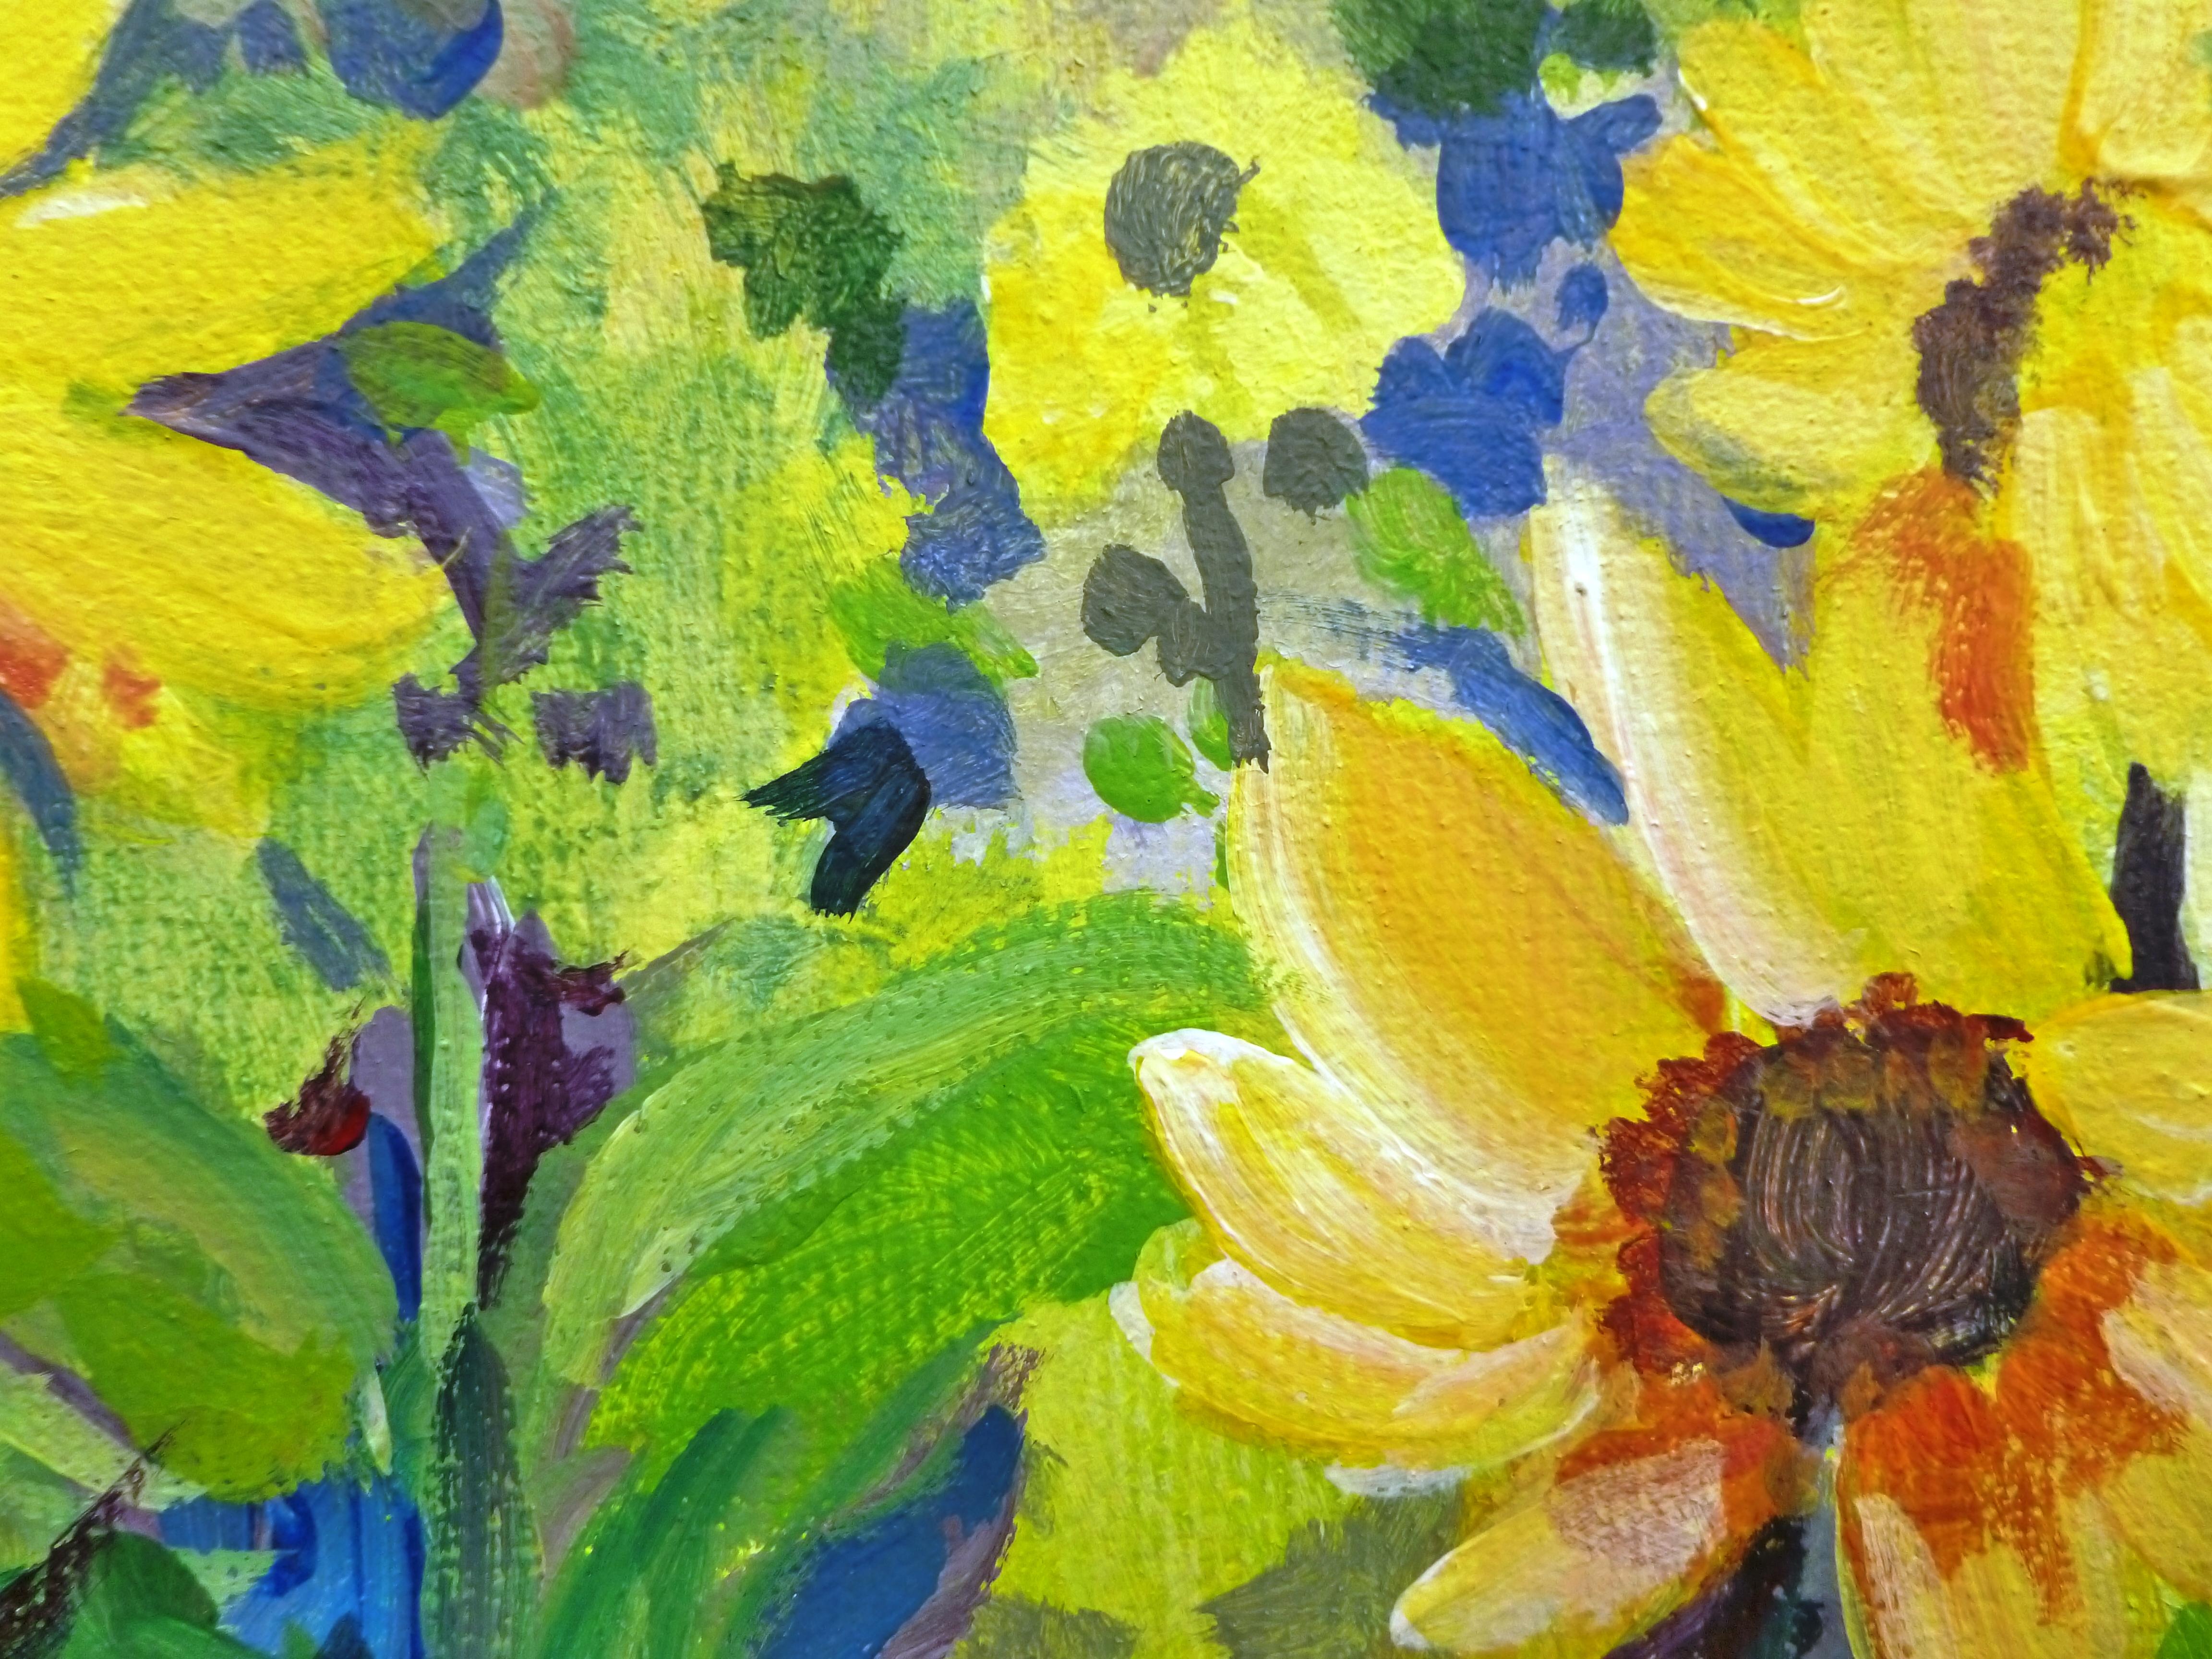 <p>Artist Comments<br />Summer in the country, and lots of space to grow things; that's what I hope this painting says. There doesn't seem to be a happier garden than sunflowers en masse.</p><p>About the Artist<br />Catherine McCargar created her